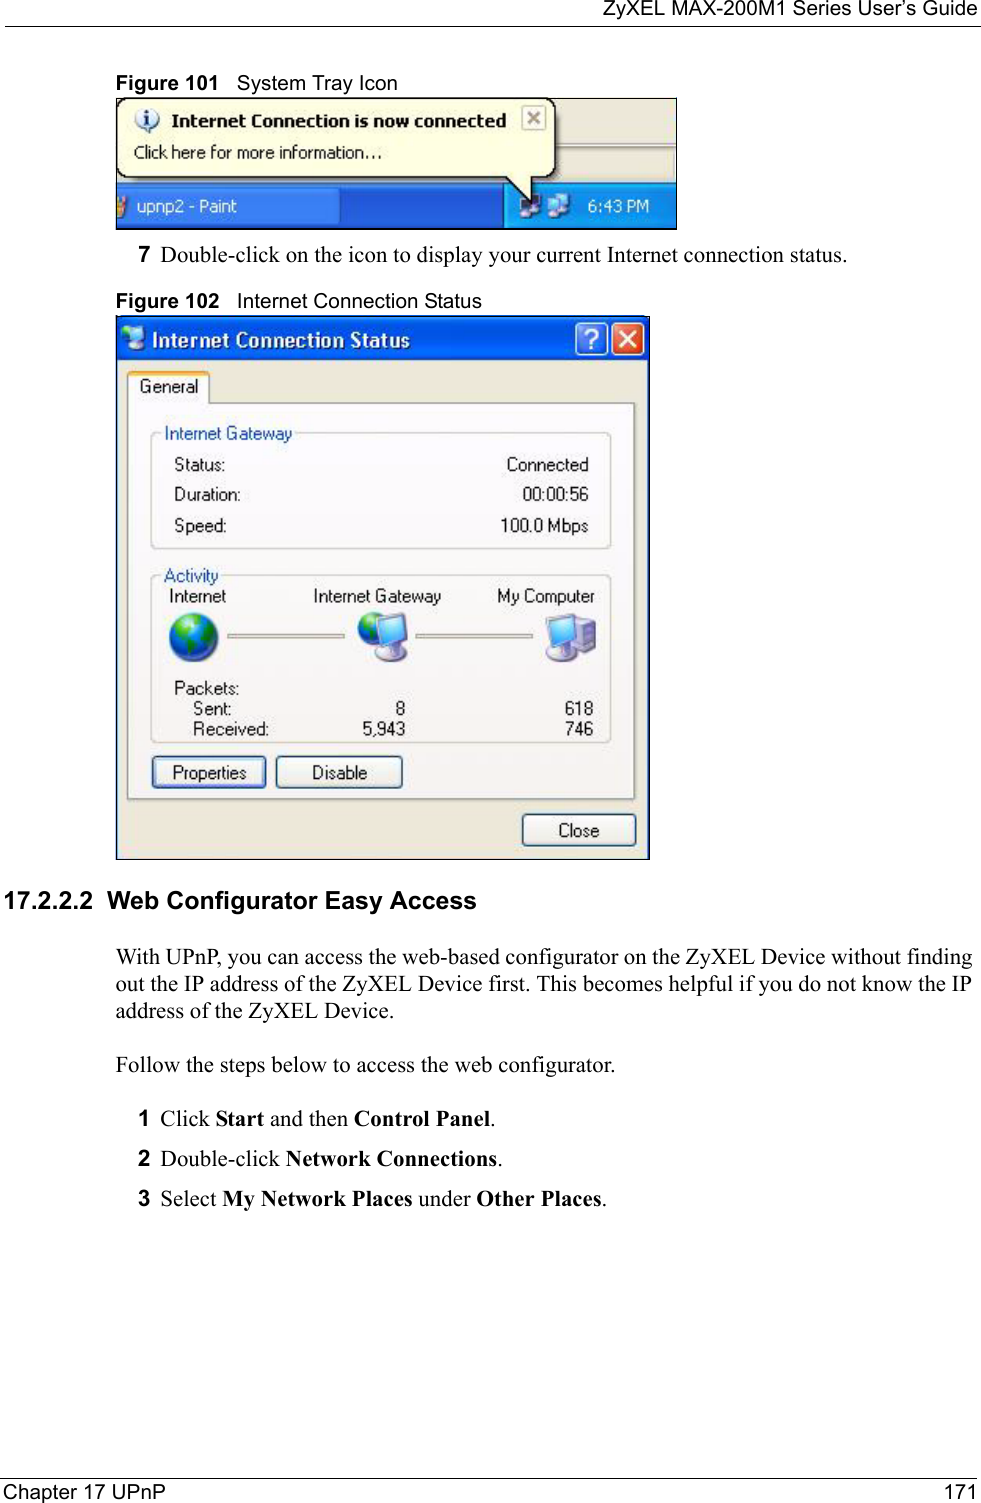 ZyXEL MAX-200M1 Series User’s GuideChapter 17 UPnP 171Figure 101   System Tray Icon7Double-click on the icon to display your current Internet connection status.Figure 102   Internet Connection Status17.2.2.2  Web Configurator Easy AccessWith UPnP, you can access the web-based configurator on the ZyXEL Device without finding out the IP address of the ZyXEL Device first. This becomes helpful if you do not know the IP address of the ZyXEL Device.Follow the steps below to access the web configurator.1Click Start and then Control Panel. 2Double-click Network Connections. 3Select My Network Places under Other Places. 